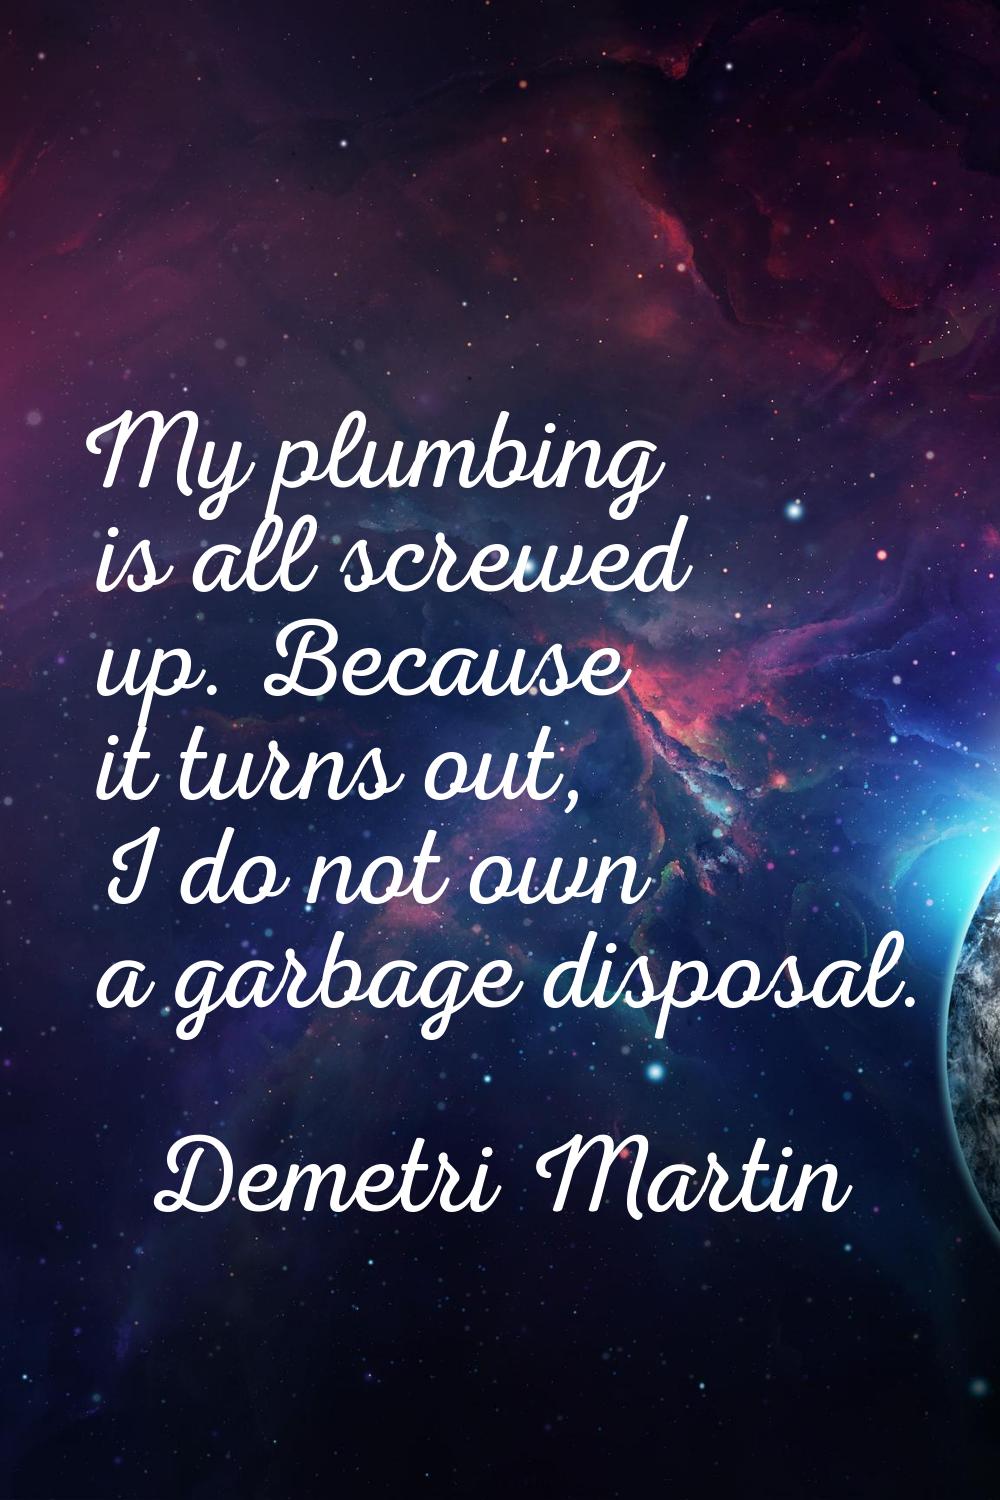 My plumbing is all screwed up. Because it turns out, I do not own a garbage disposal.